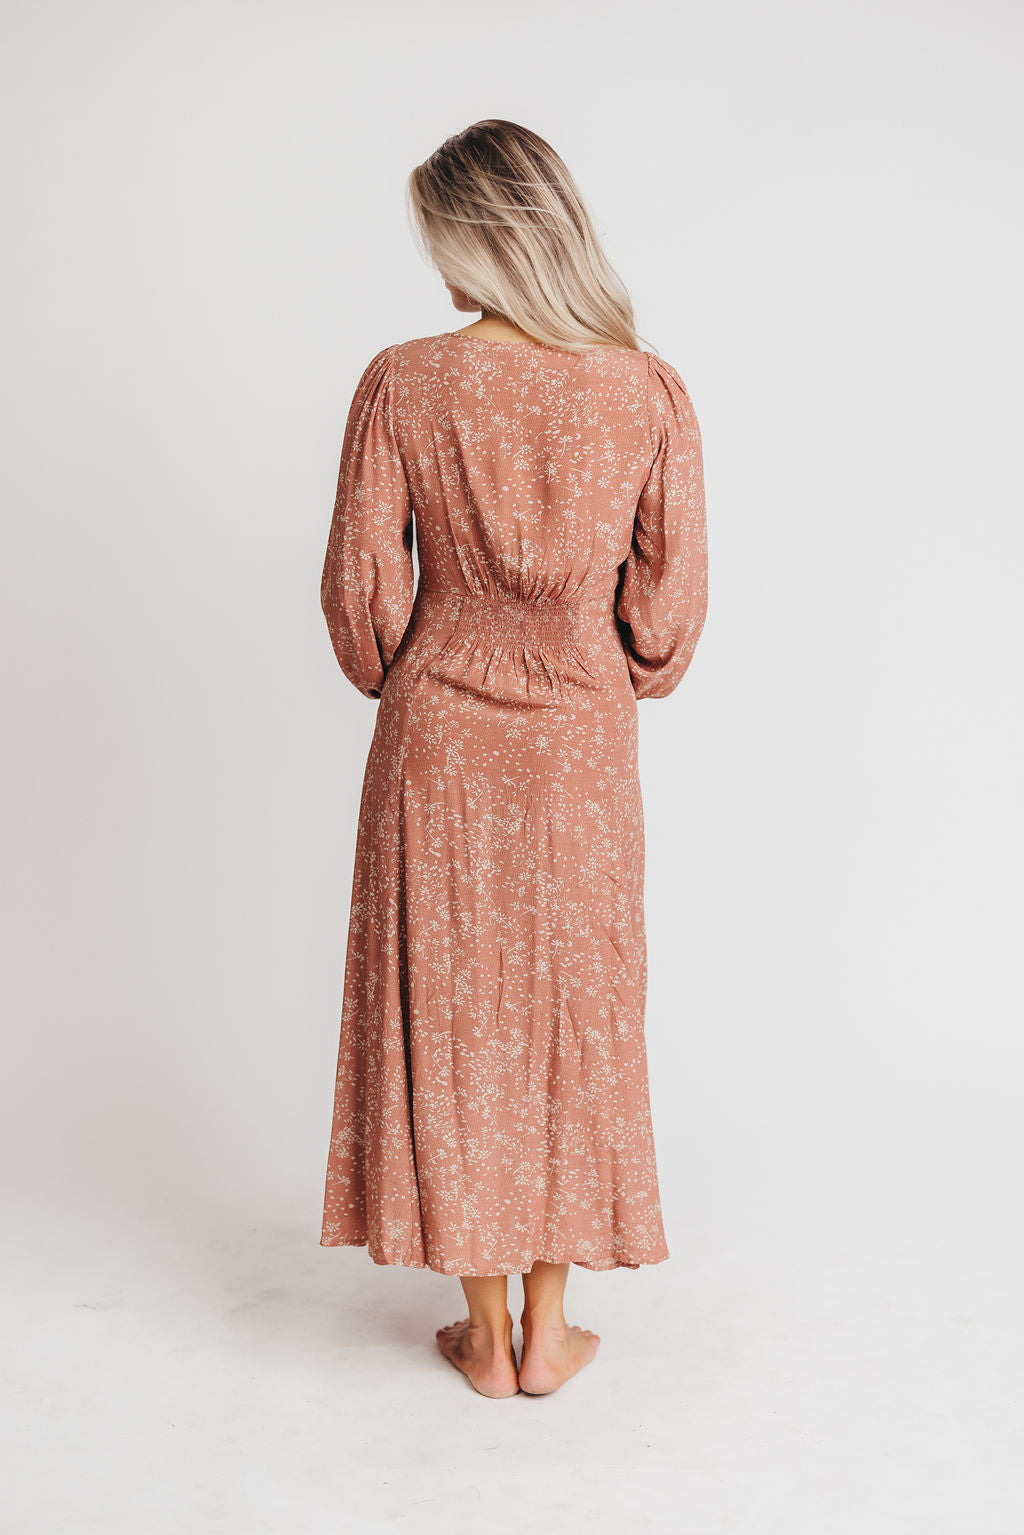 Brandi Long-Sleeve Button-Up Maxi Dress in Rosewood Floral